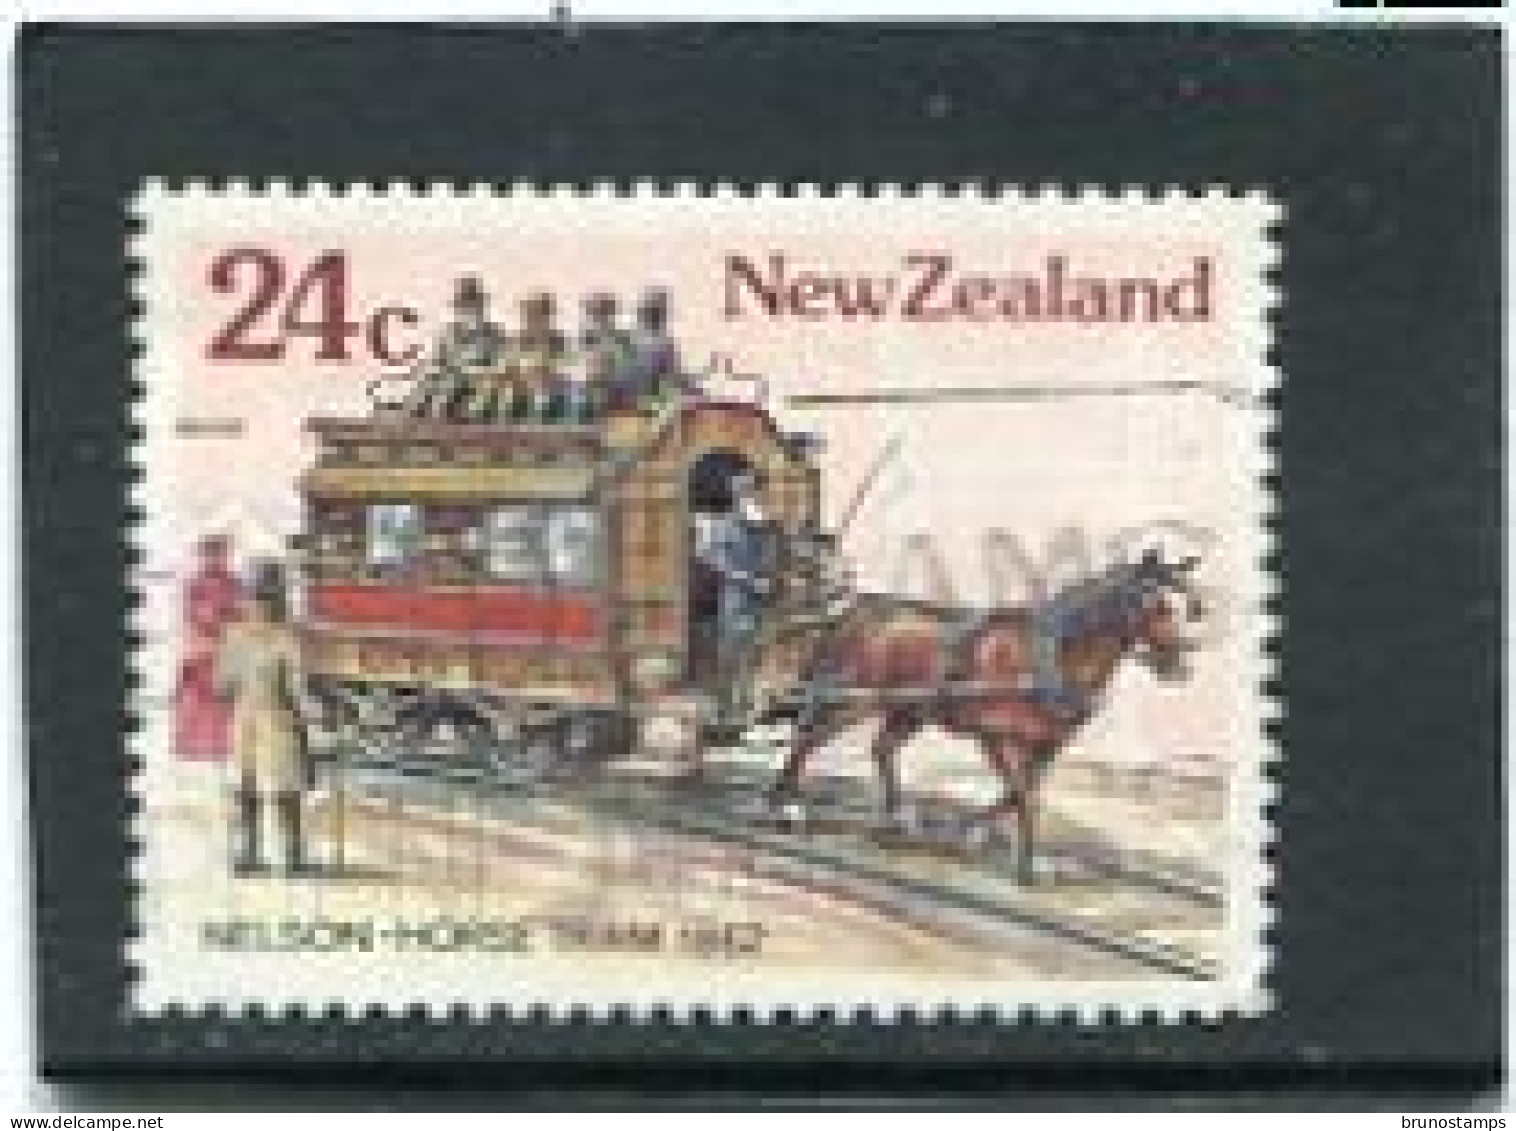 NEW ZEALAND - 1985  24c  NELSON HORSE TRAM  FINE USED - Usados